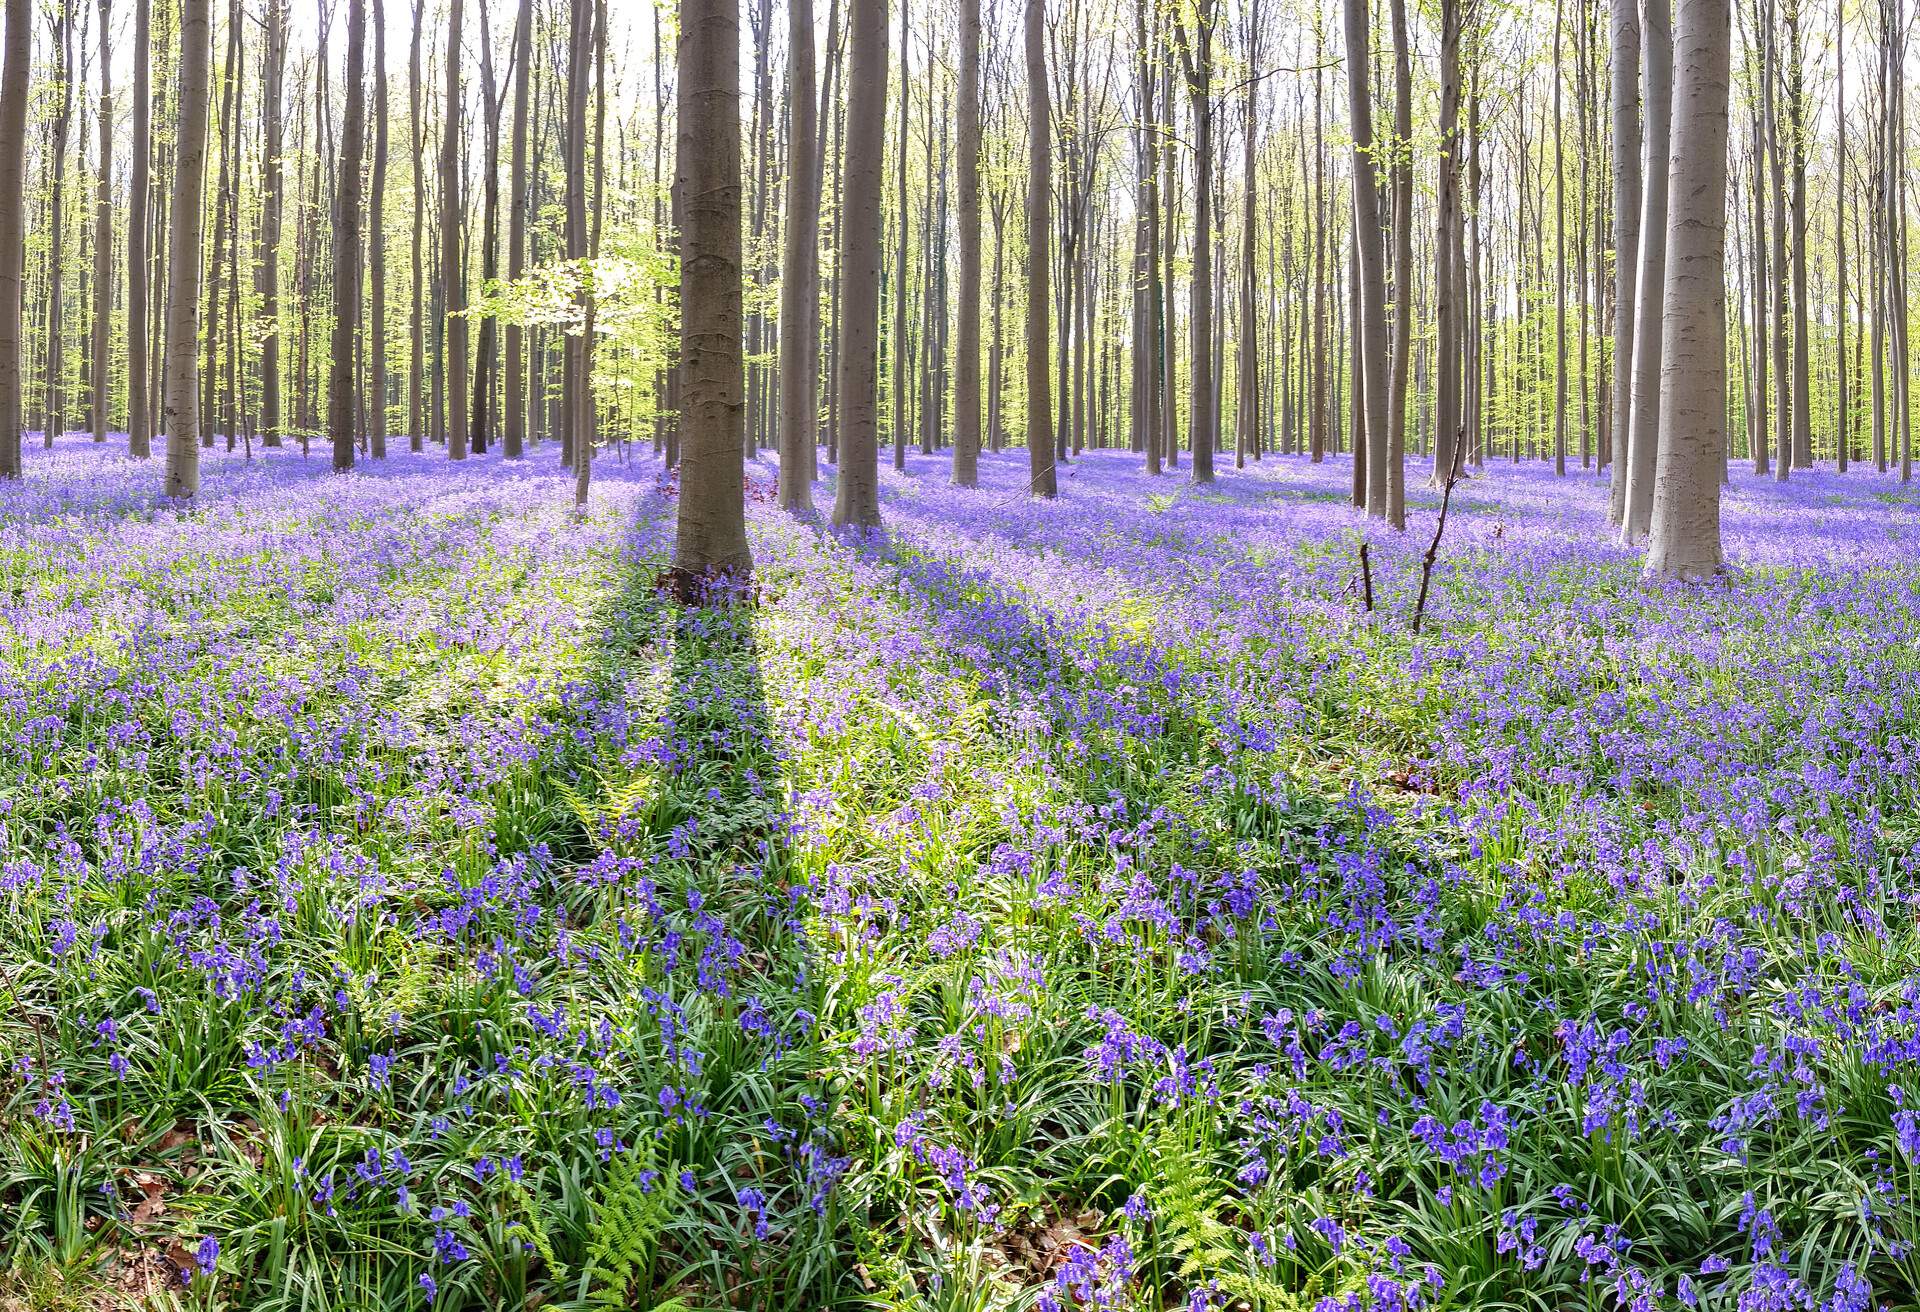 The forest of Halle is known in the region for its bluebell carpet which covers the forest floor for a few weeks each spring, attracting many visitors.